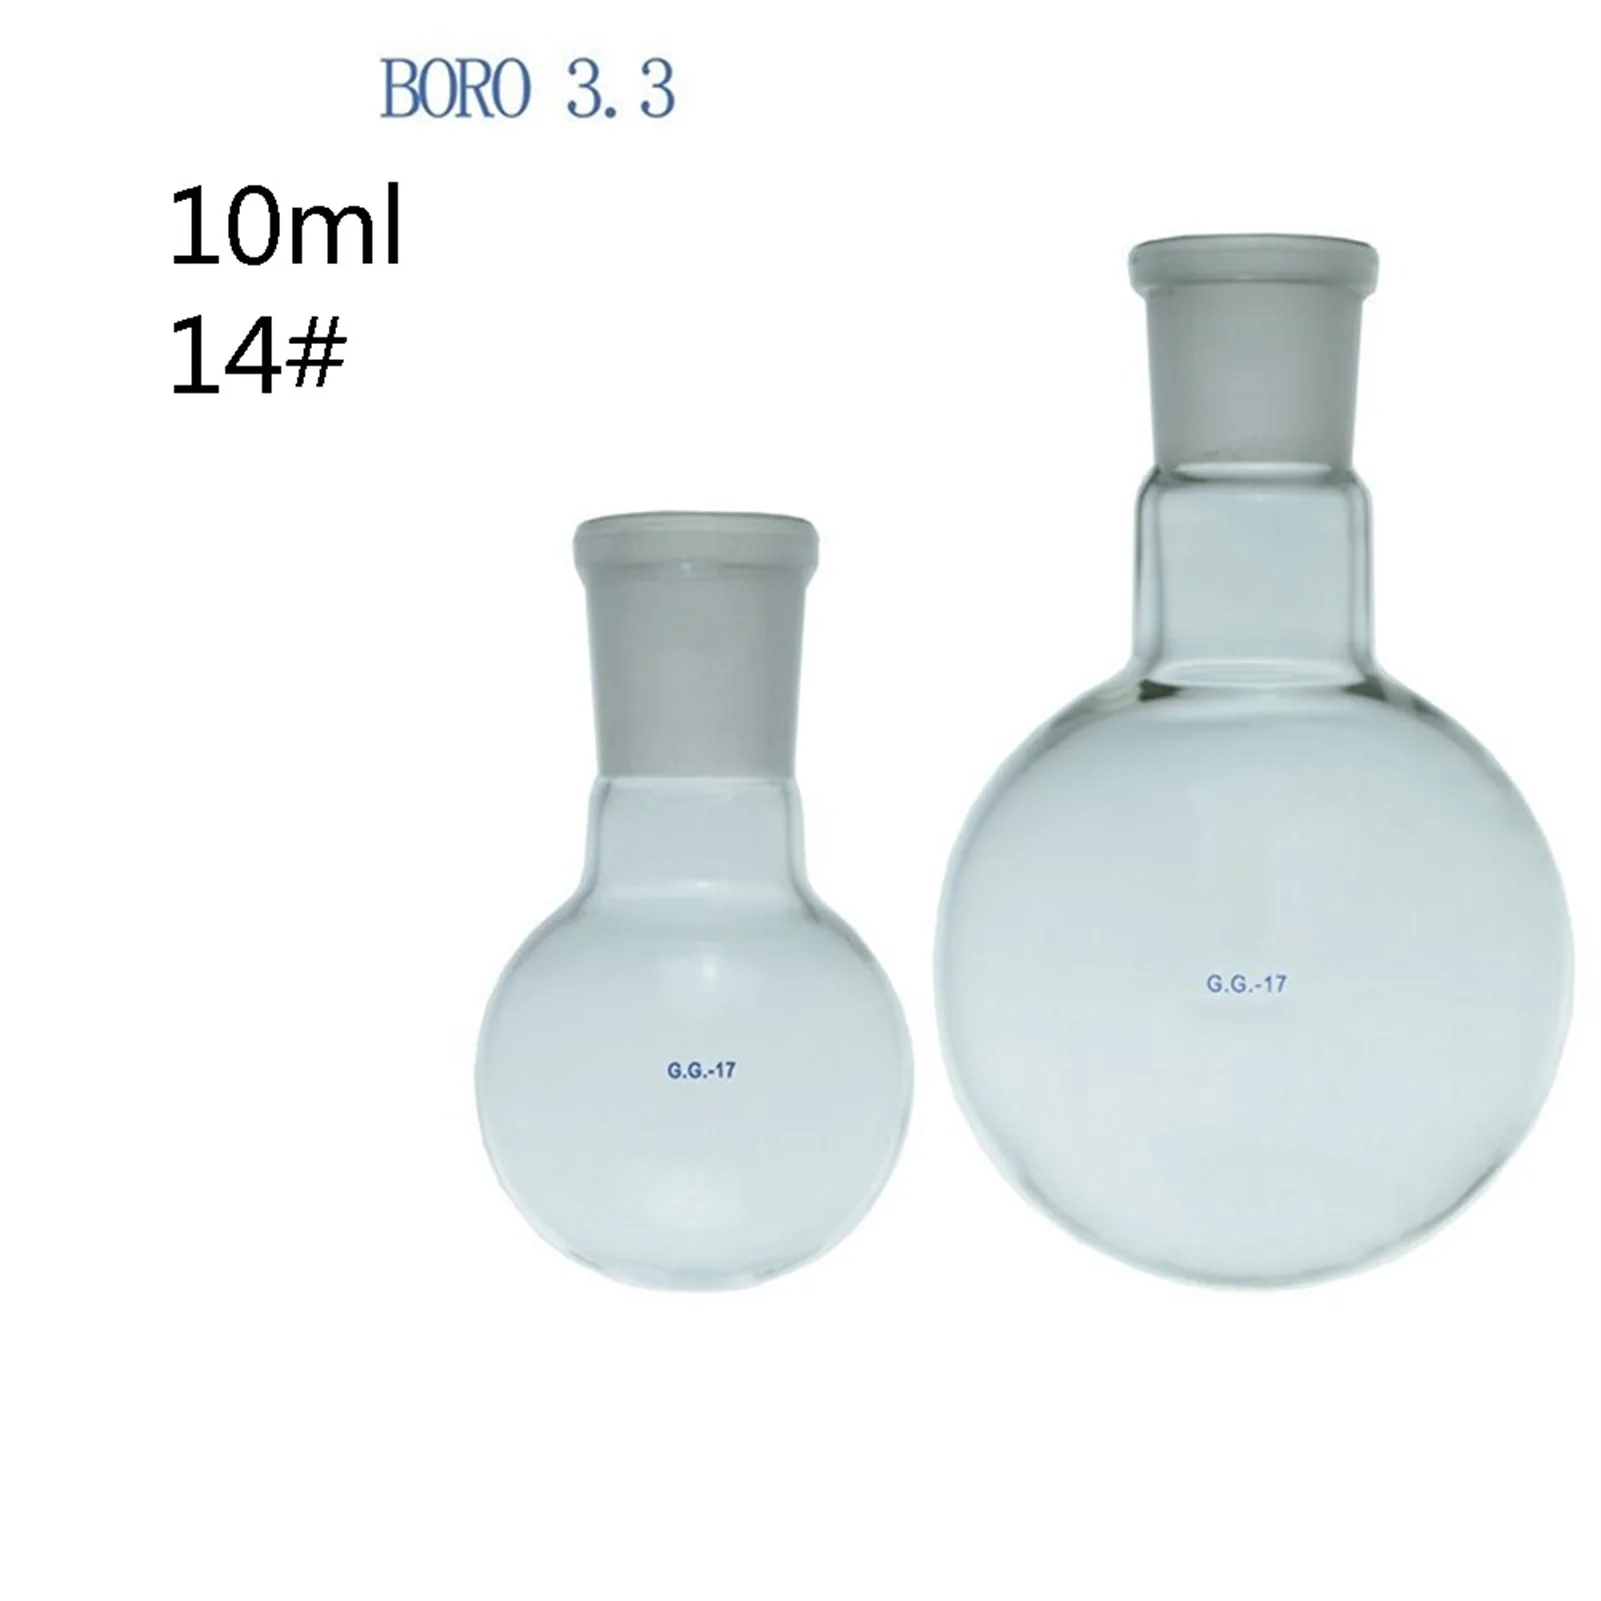 

10ml Boiling Flask Round Bottom 14# Ground Mouth Borosilicate 3.3 Glass Heat Resistant Lab Distilling Flasks- Pack Of 1